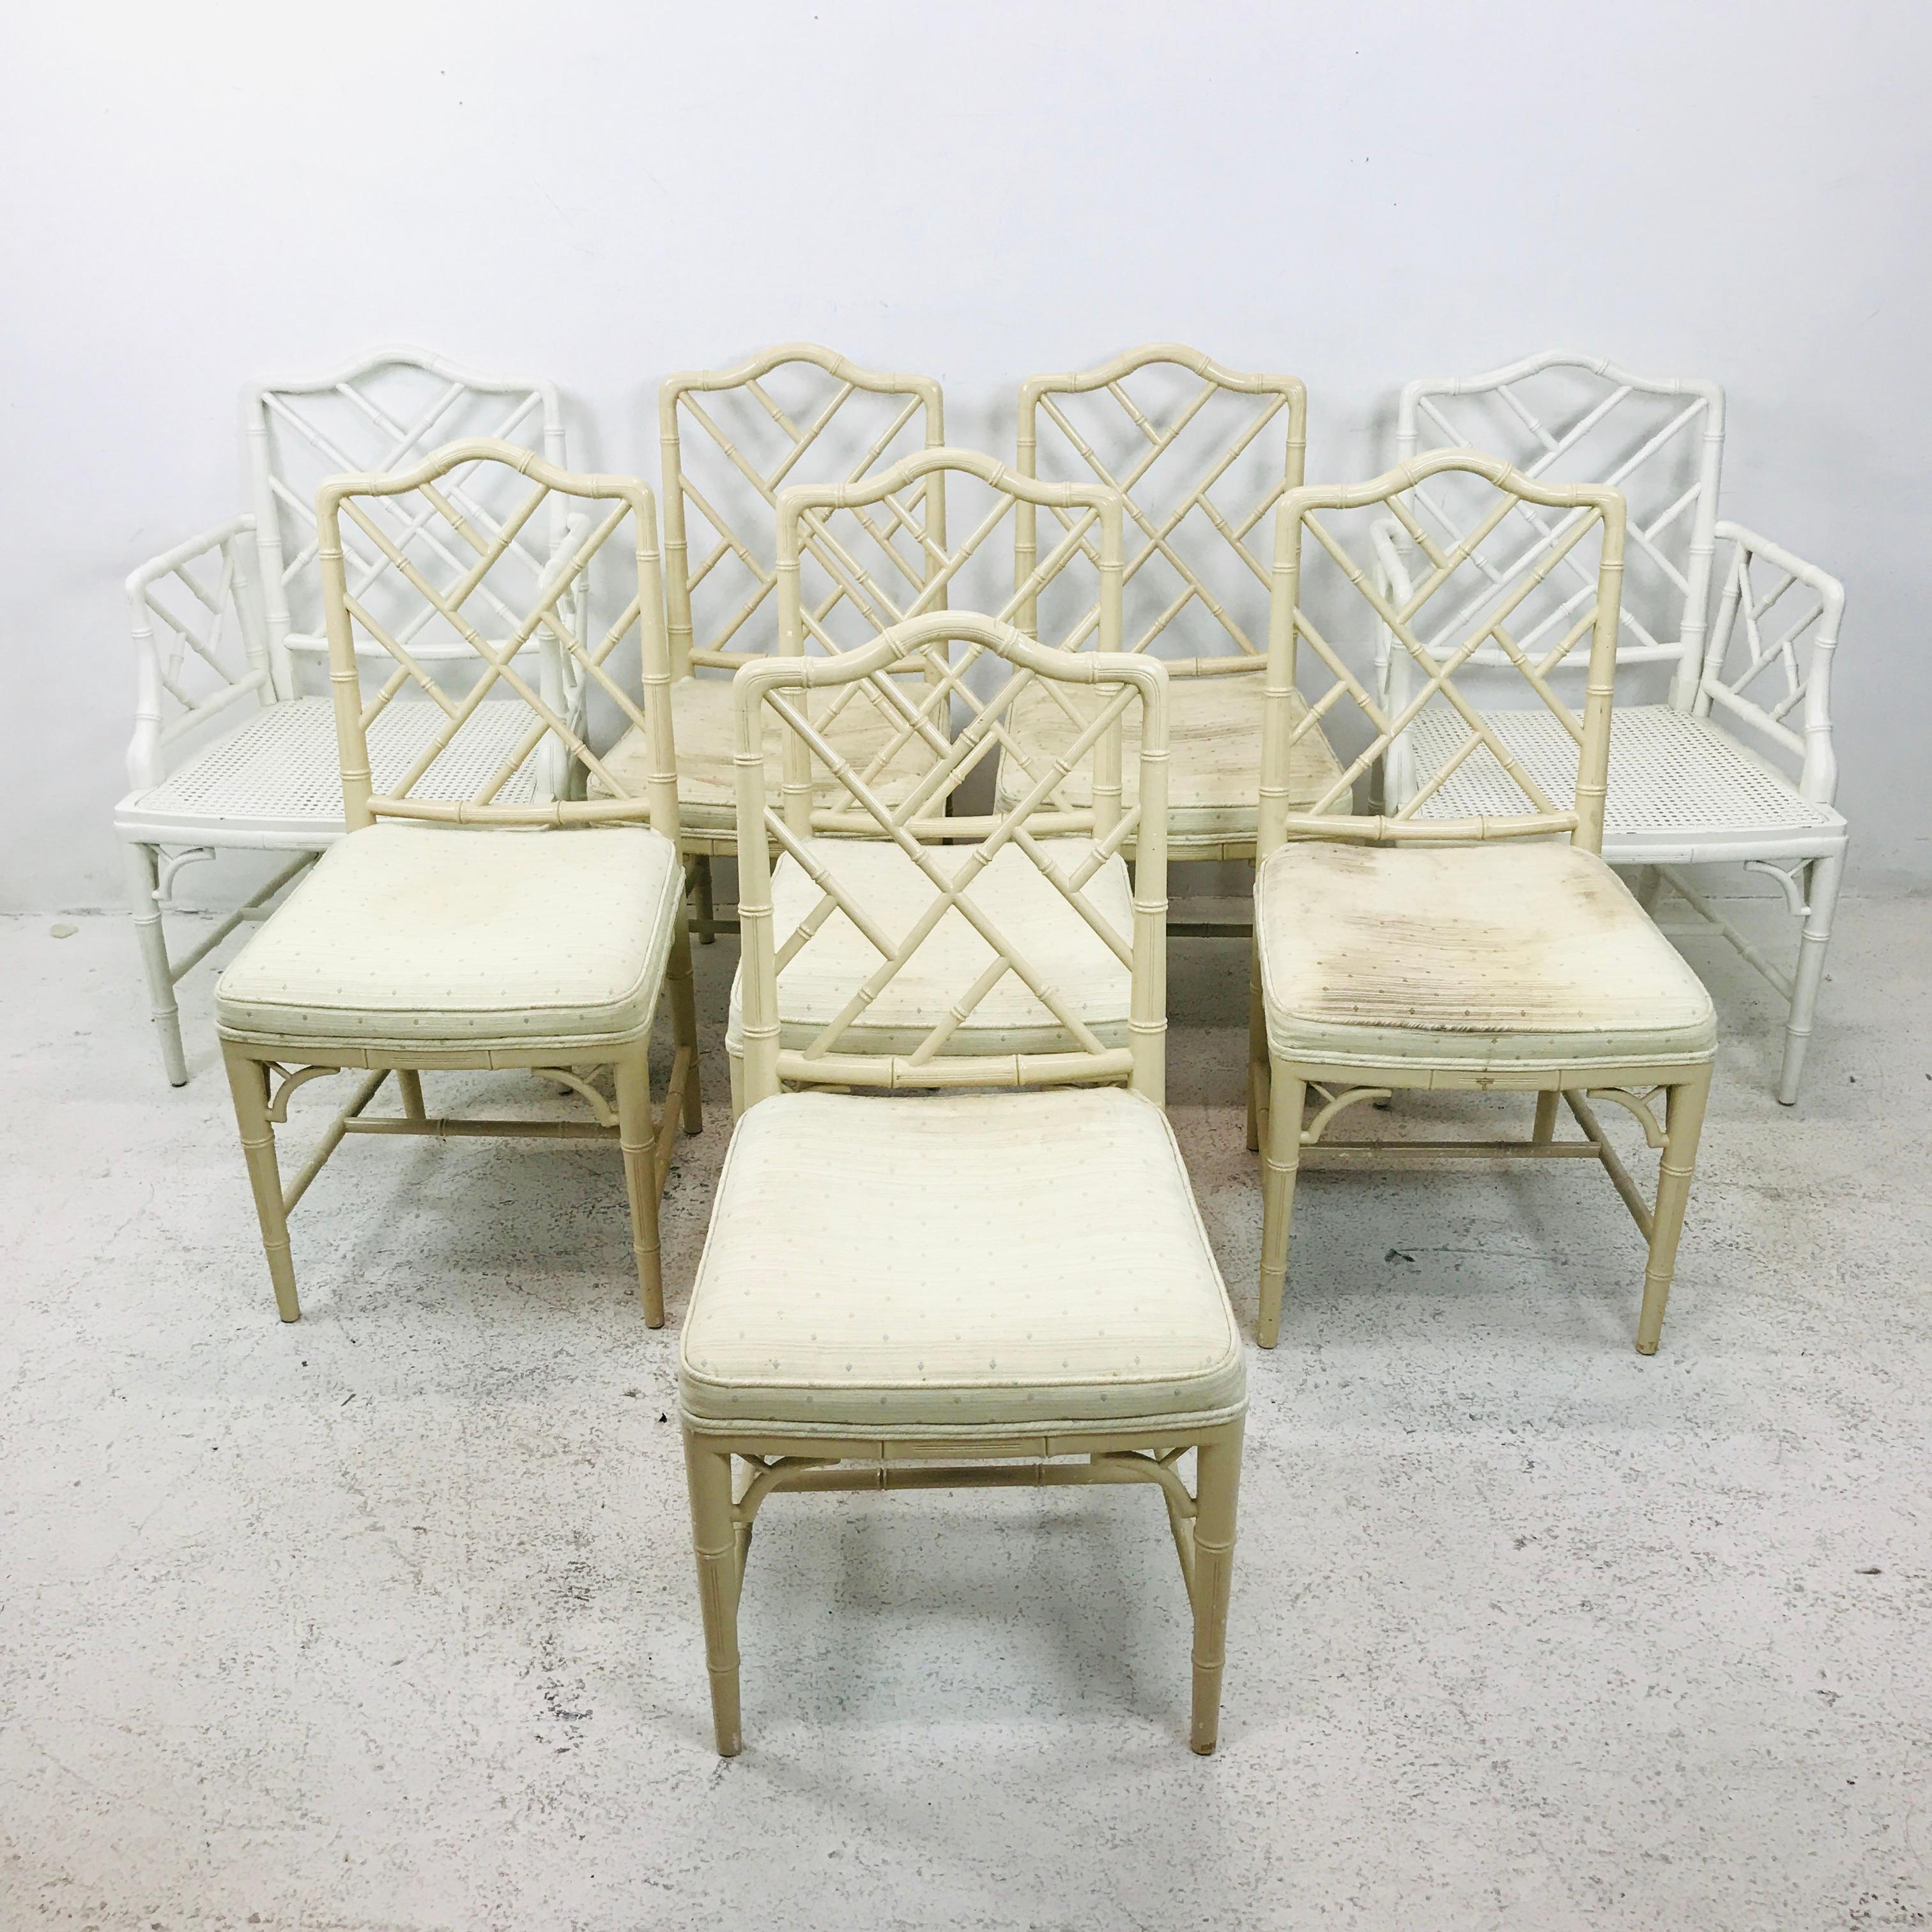 Set of eight faux bamboo Chinese Chippendale dining chairs (two armchairs and six side chairs), featuring trellis backs and arms and tapered legs. Armchairs have caned seats - reupholstery and refinishing is recommended on all. 
Measures: Side